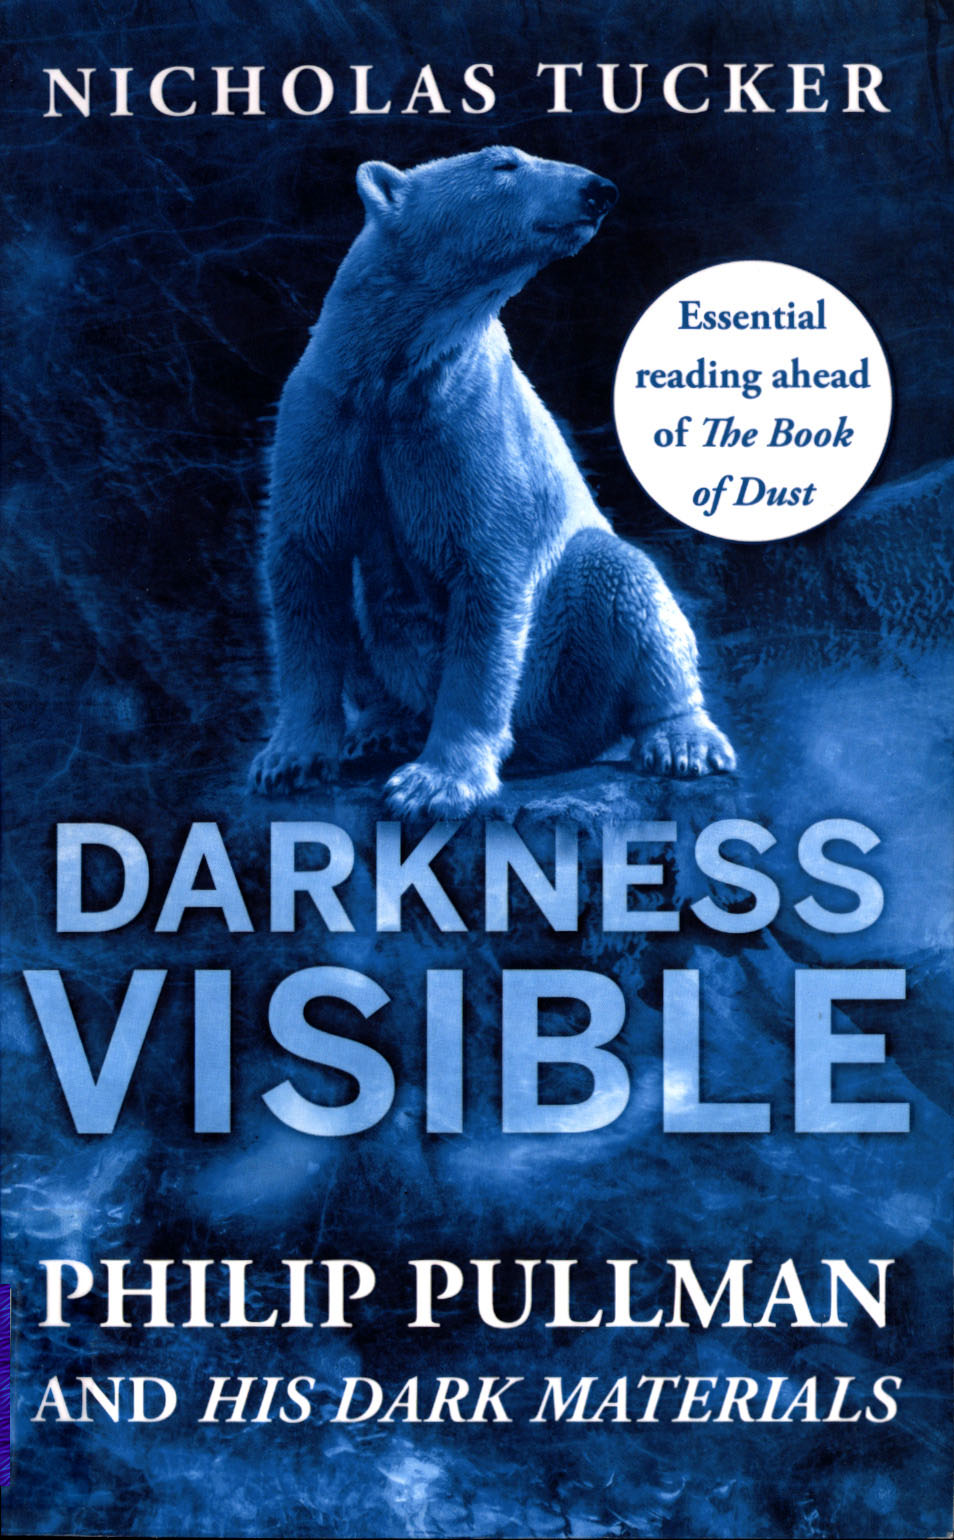 Darkness Visible book cover